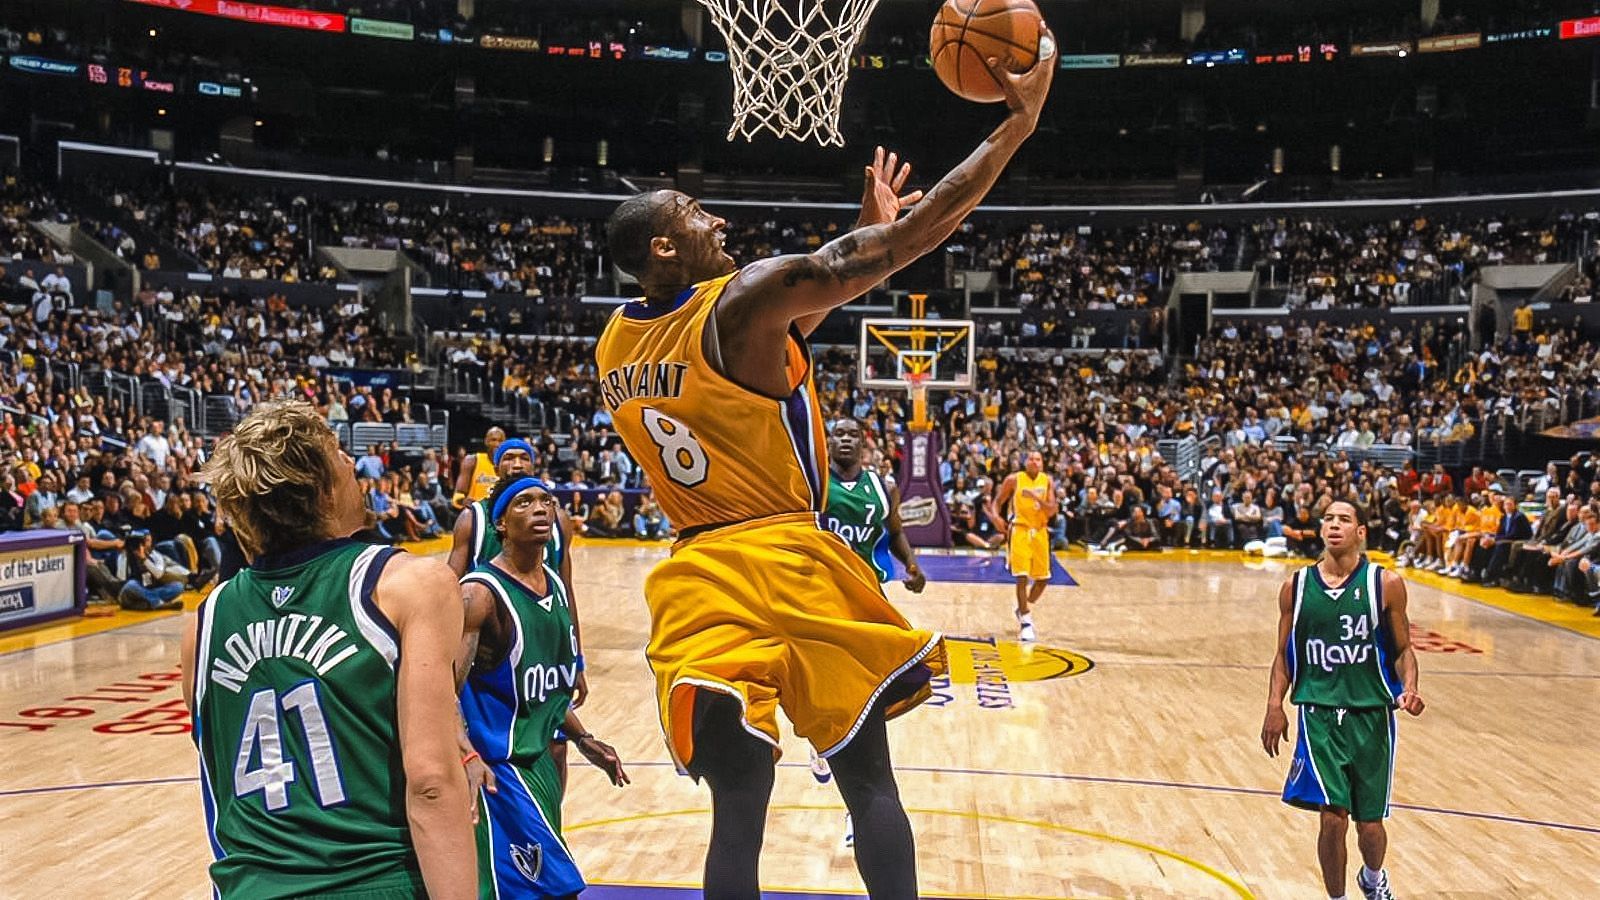 LA Lakers legend Kobe Bryant during his iconic 62-point performance in three quarters against the Dallas Mavericks on Dec. 20, 2005 